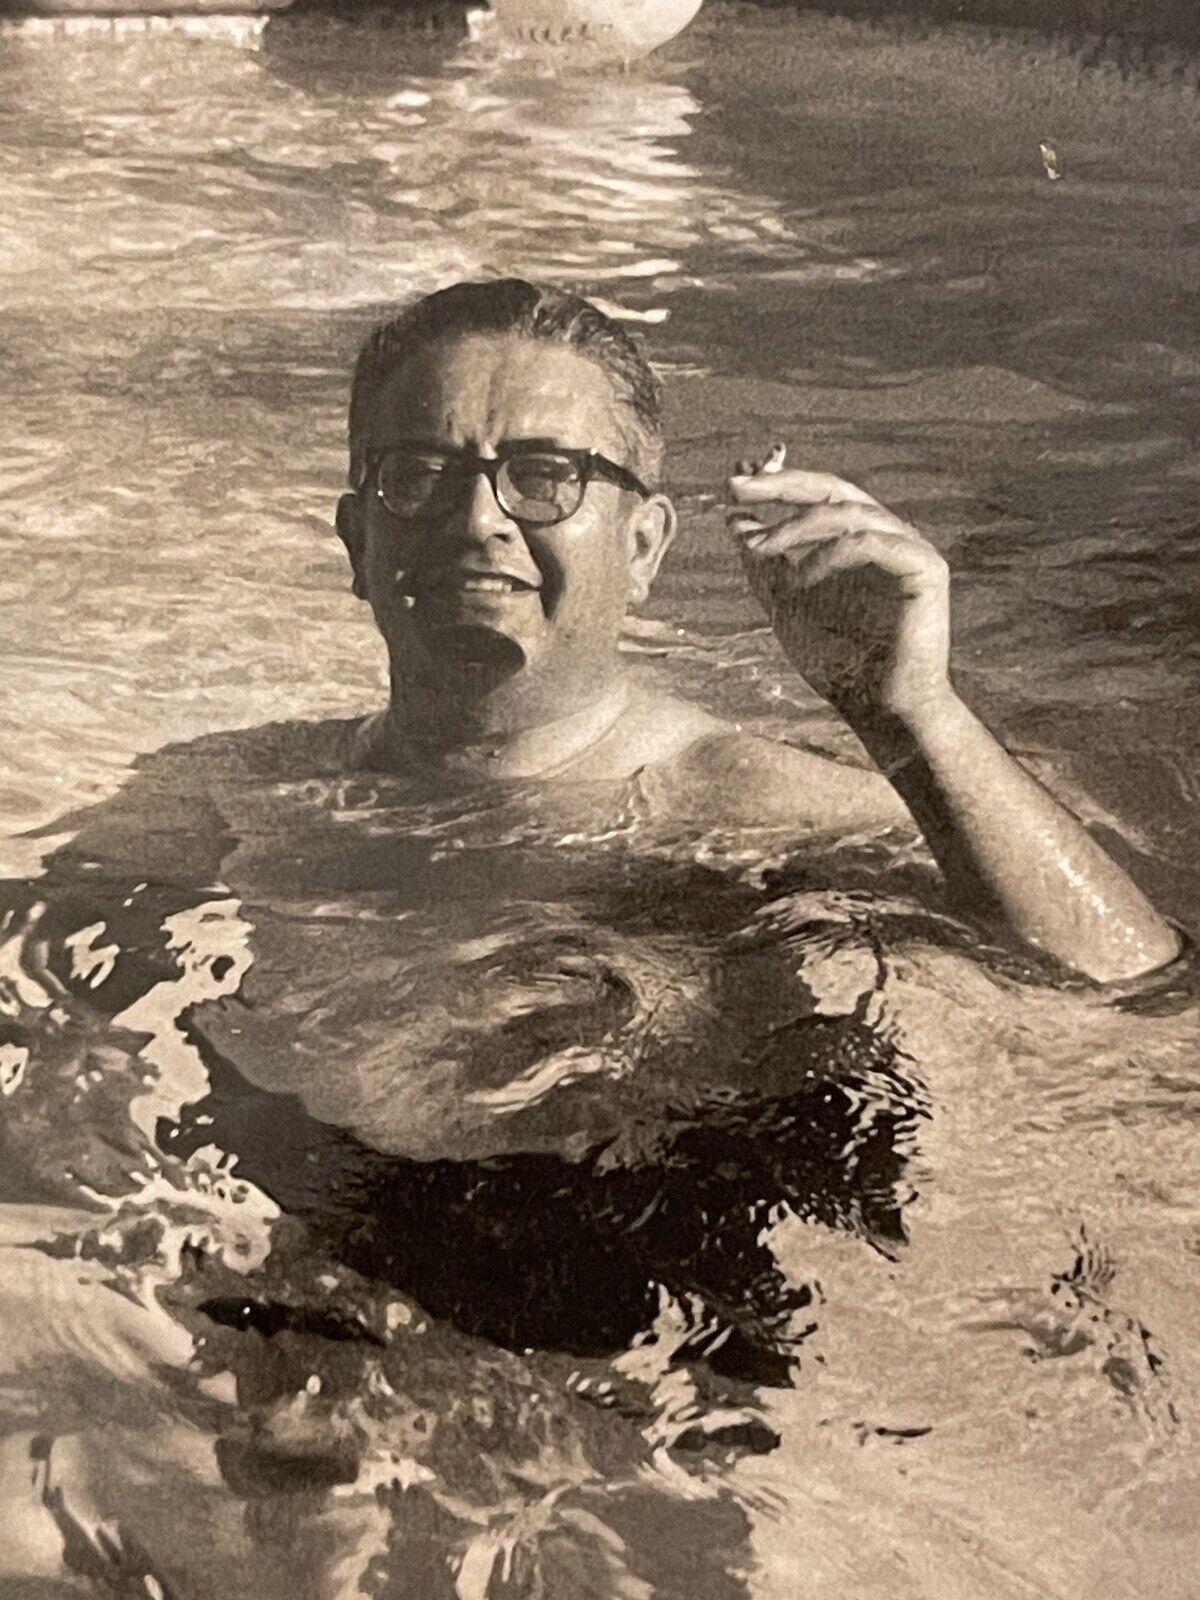 Vintage Photo Man in Pool Holding Cigarette Above Water Ball Floating Behind Him